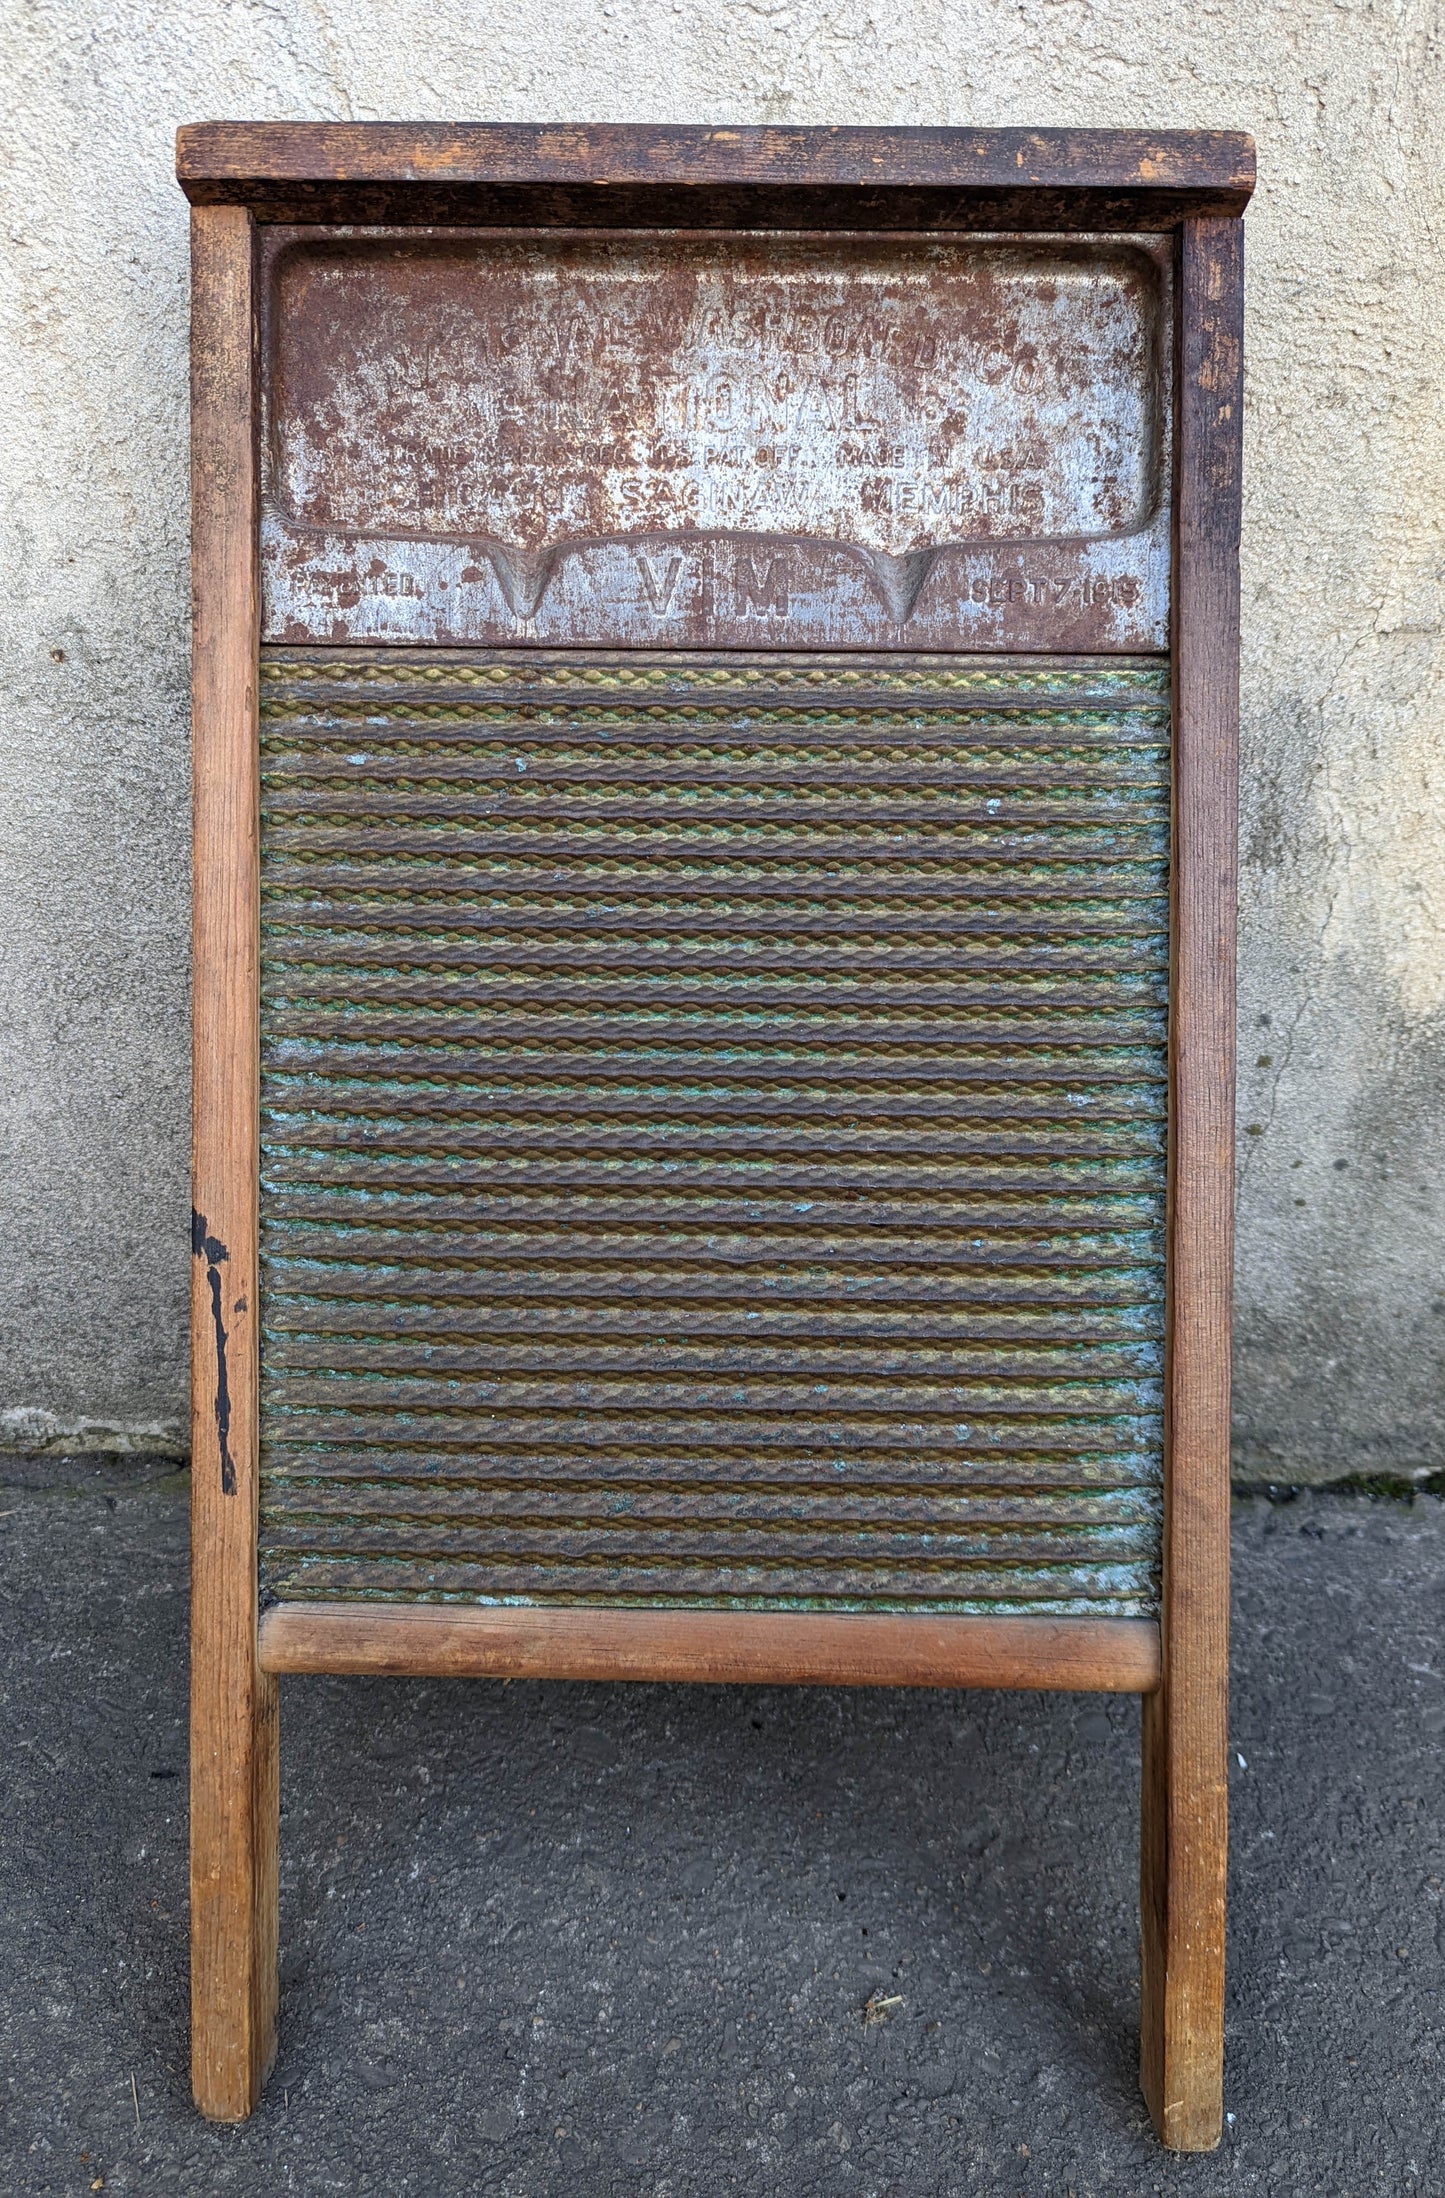 Vintage Old Antique Wood Wooden Metal Steel Brass National Washboard Clothes Clothing Wash Board Washer